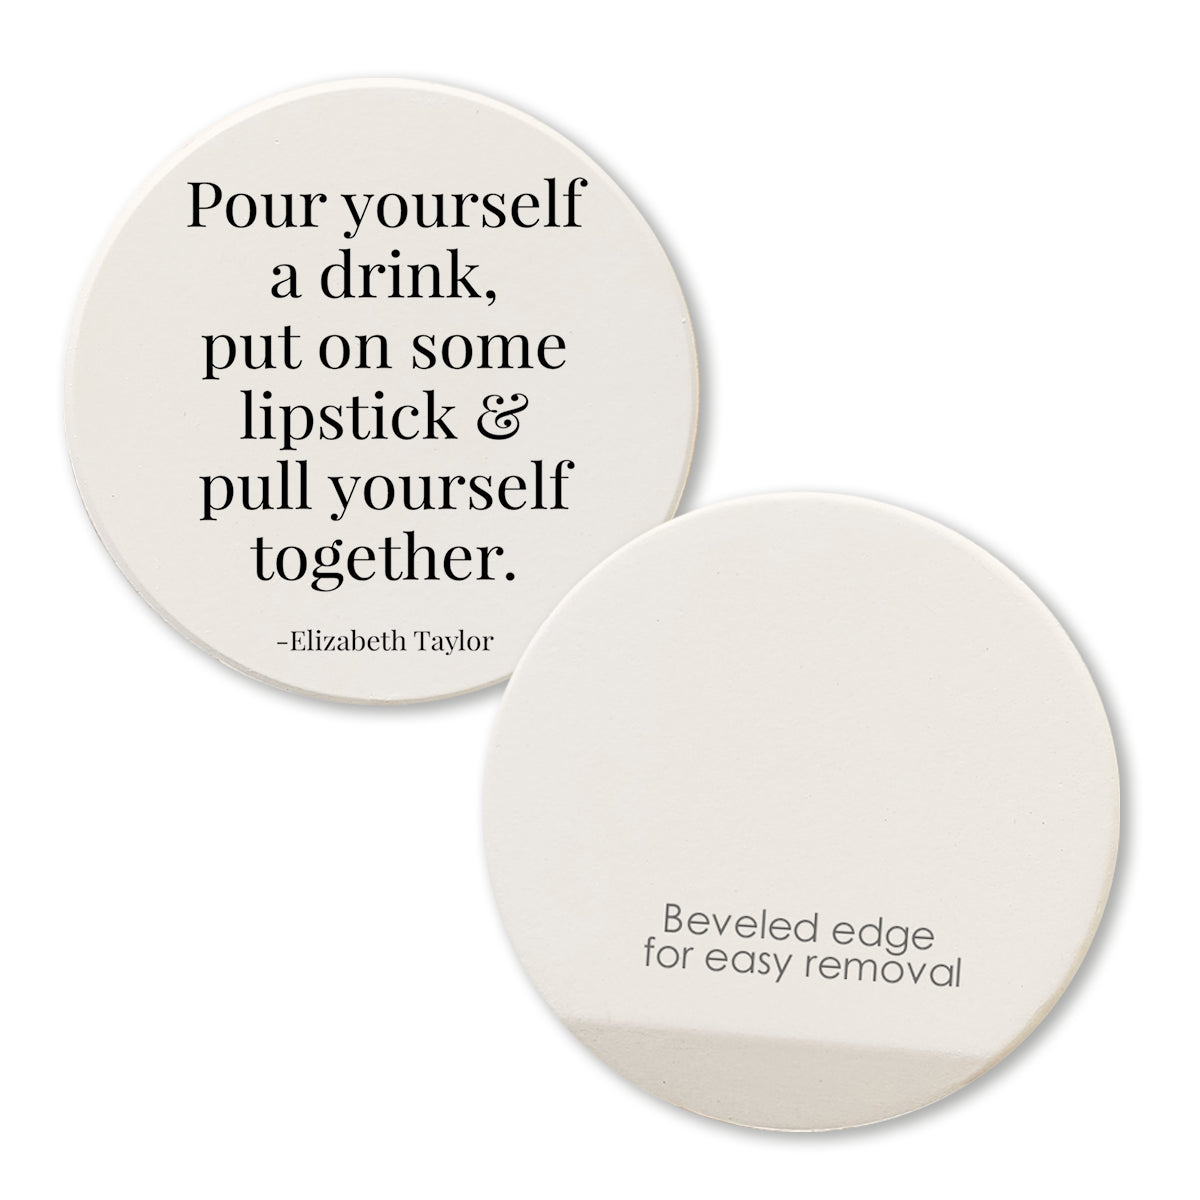 "Pour Yourself a Drink" Round Car Coaster